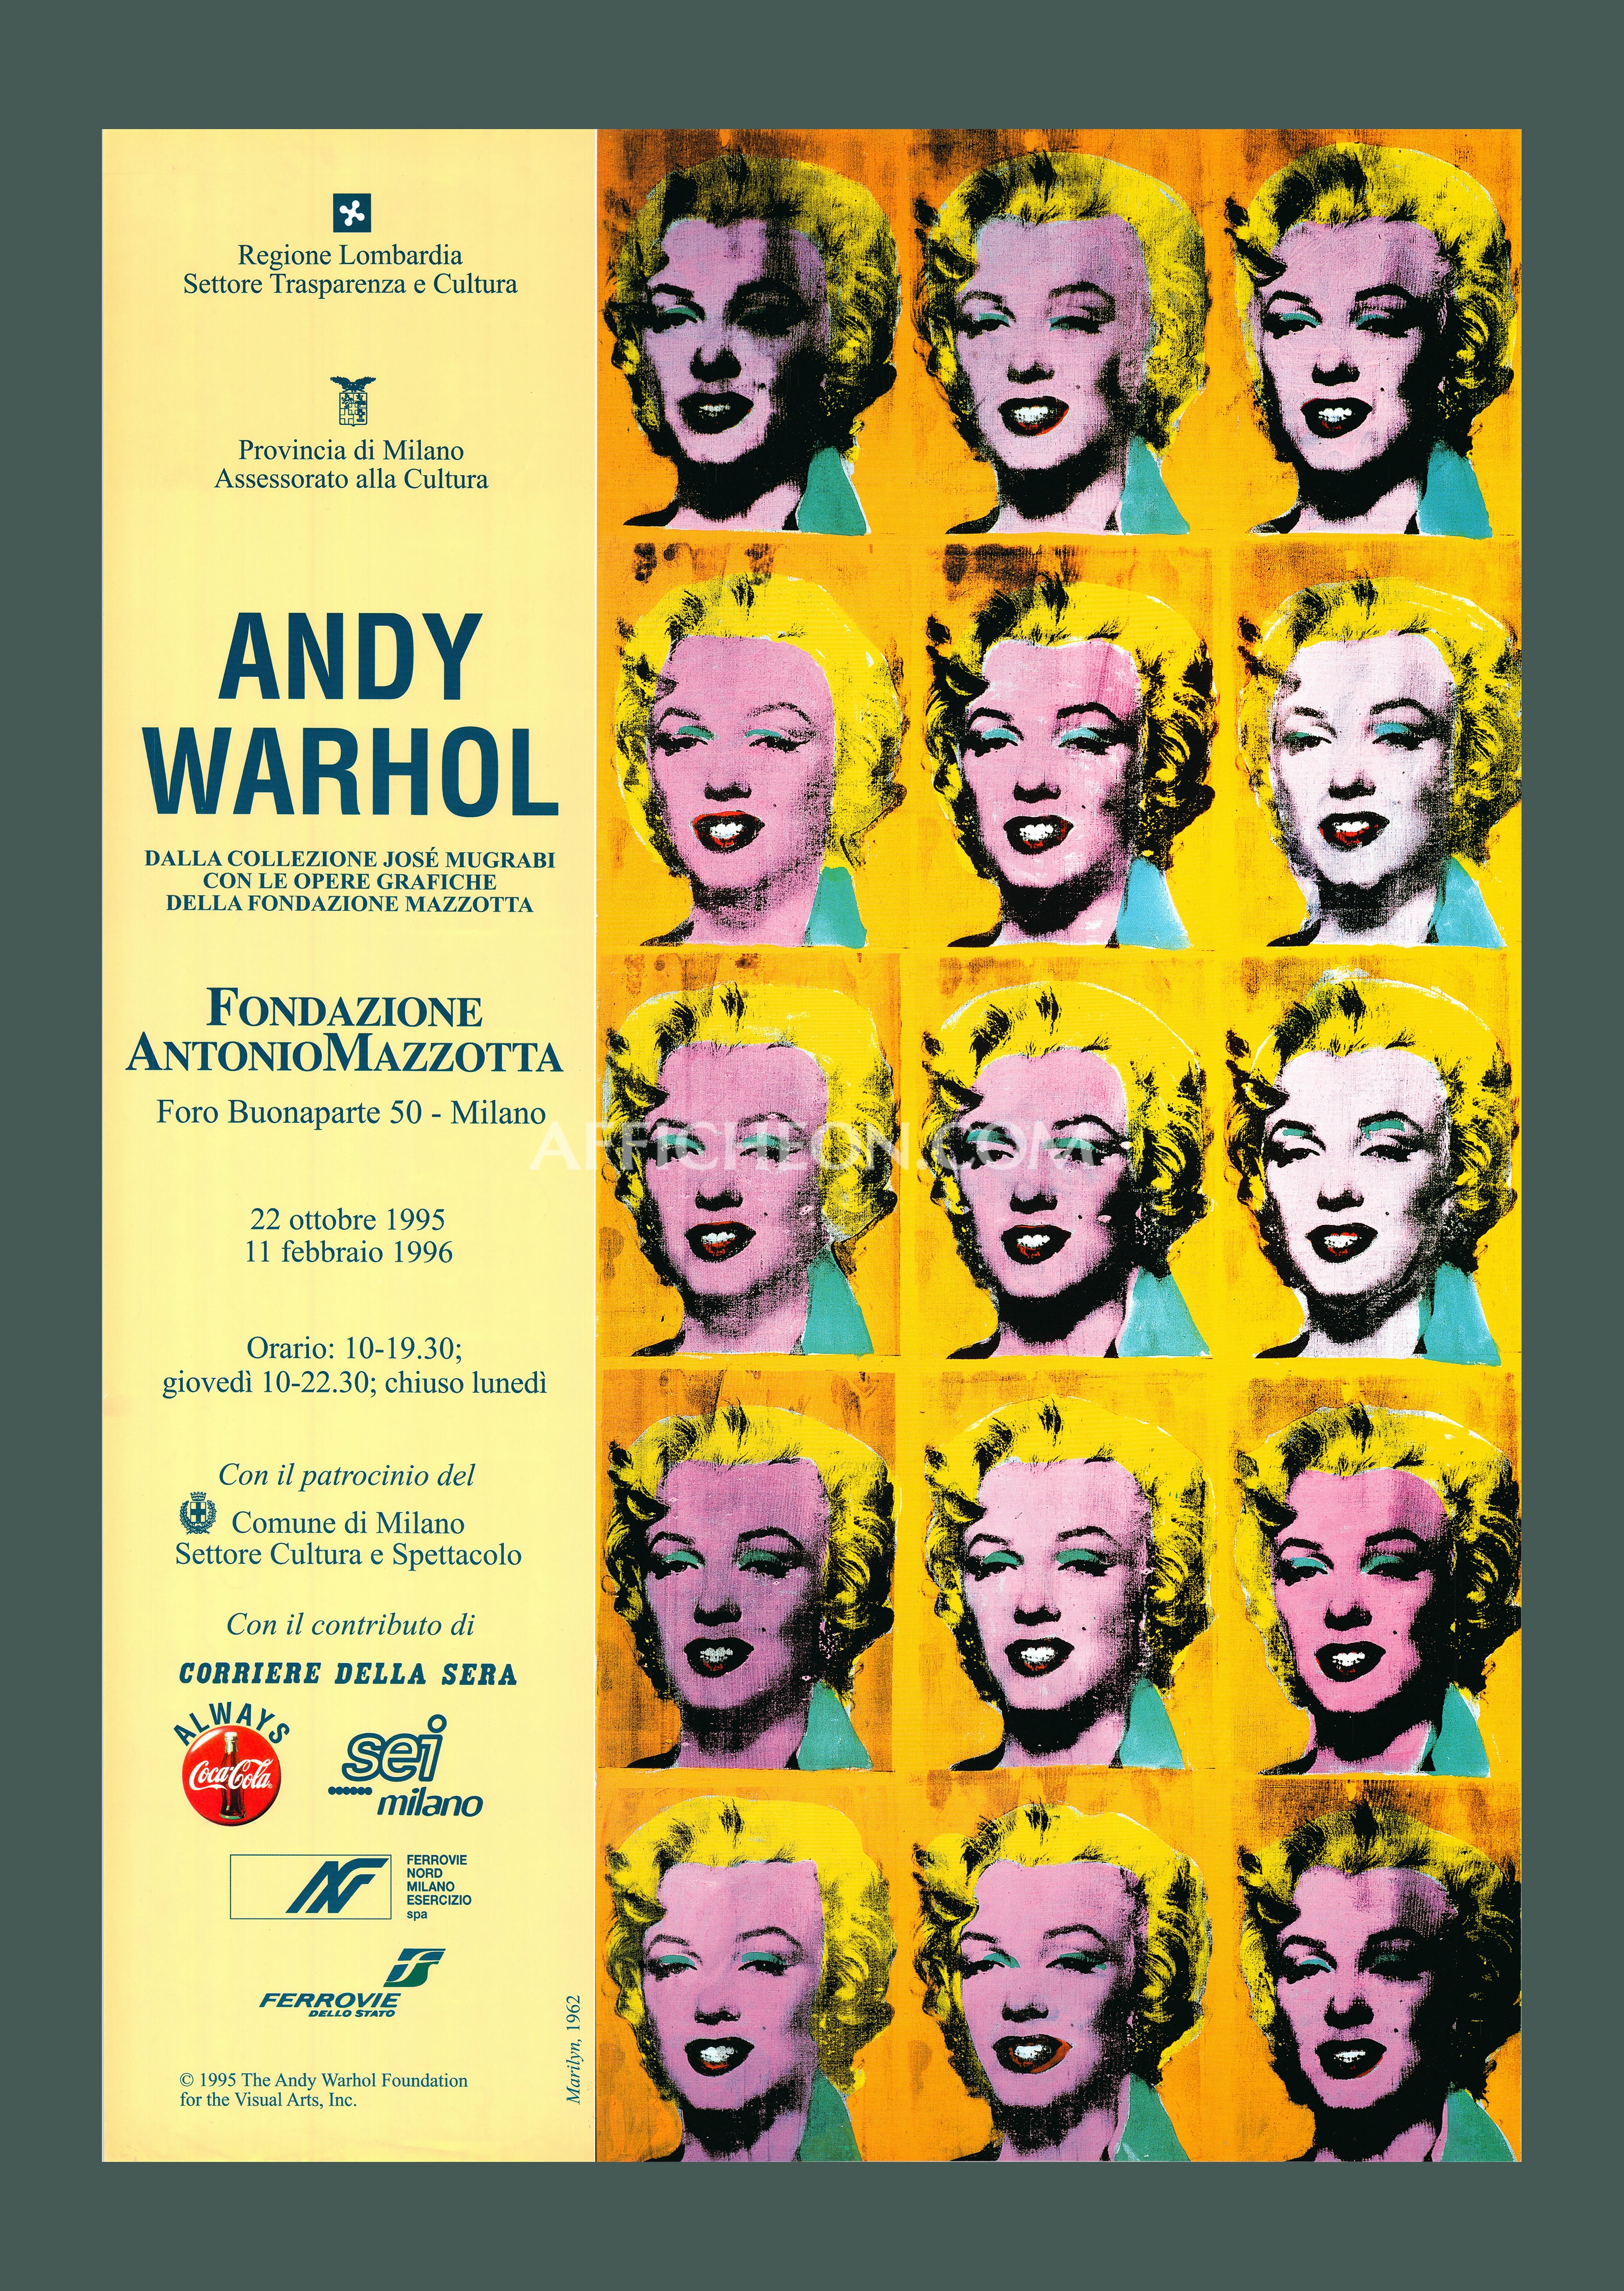 Andy Warhol - Martini Gallery, original vintage print on linen for Sale